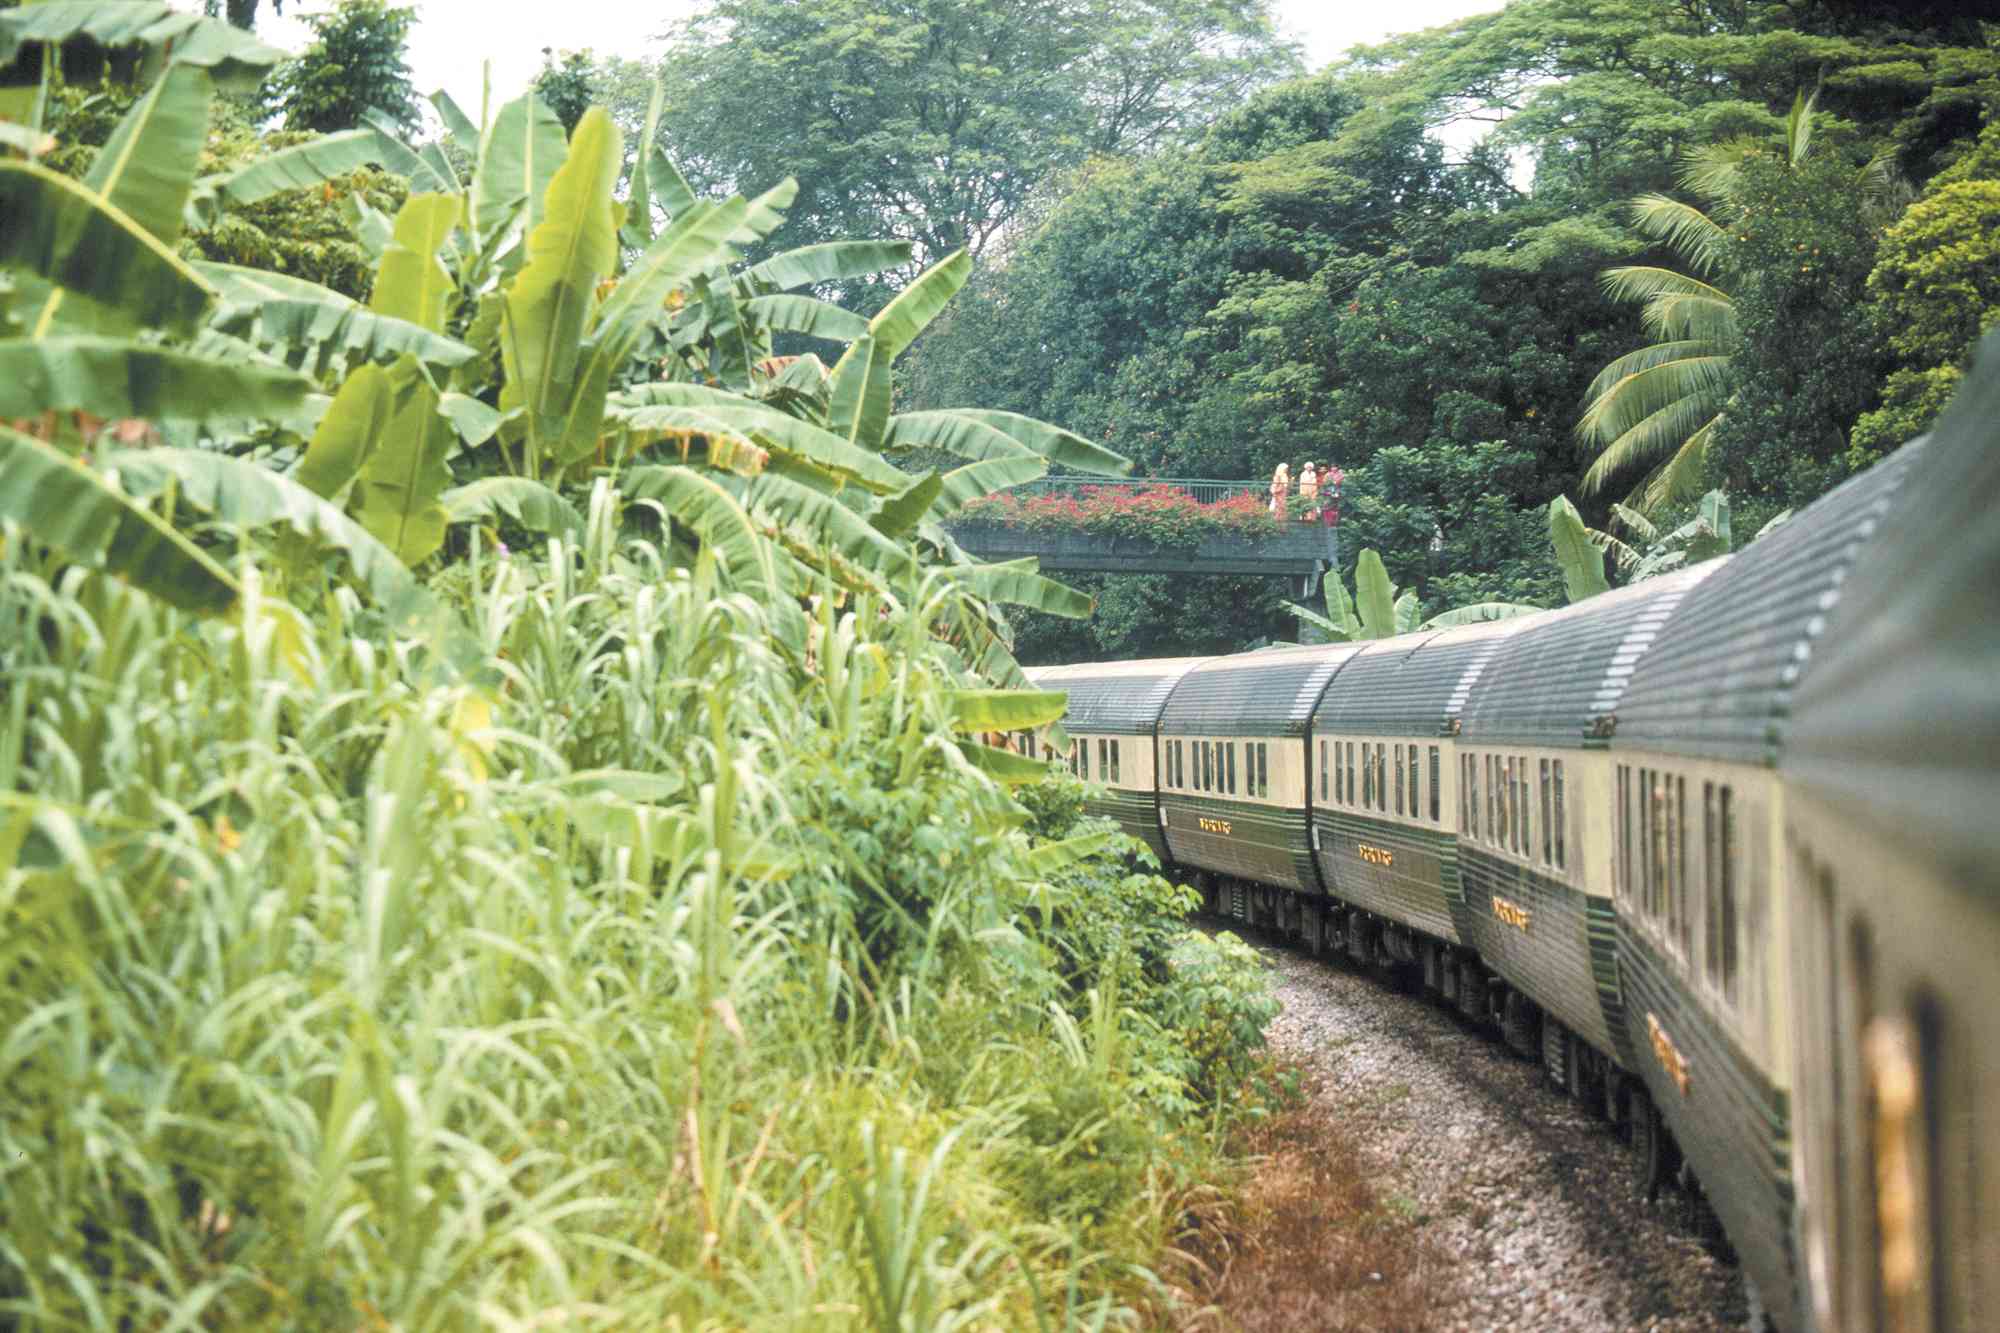 belmond brought back its most thrilling trains through asia – here's what to expect